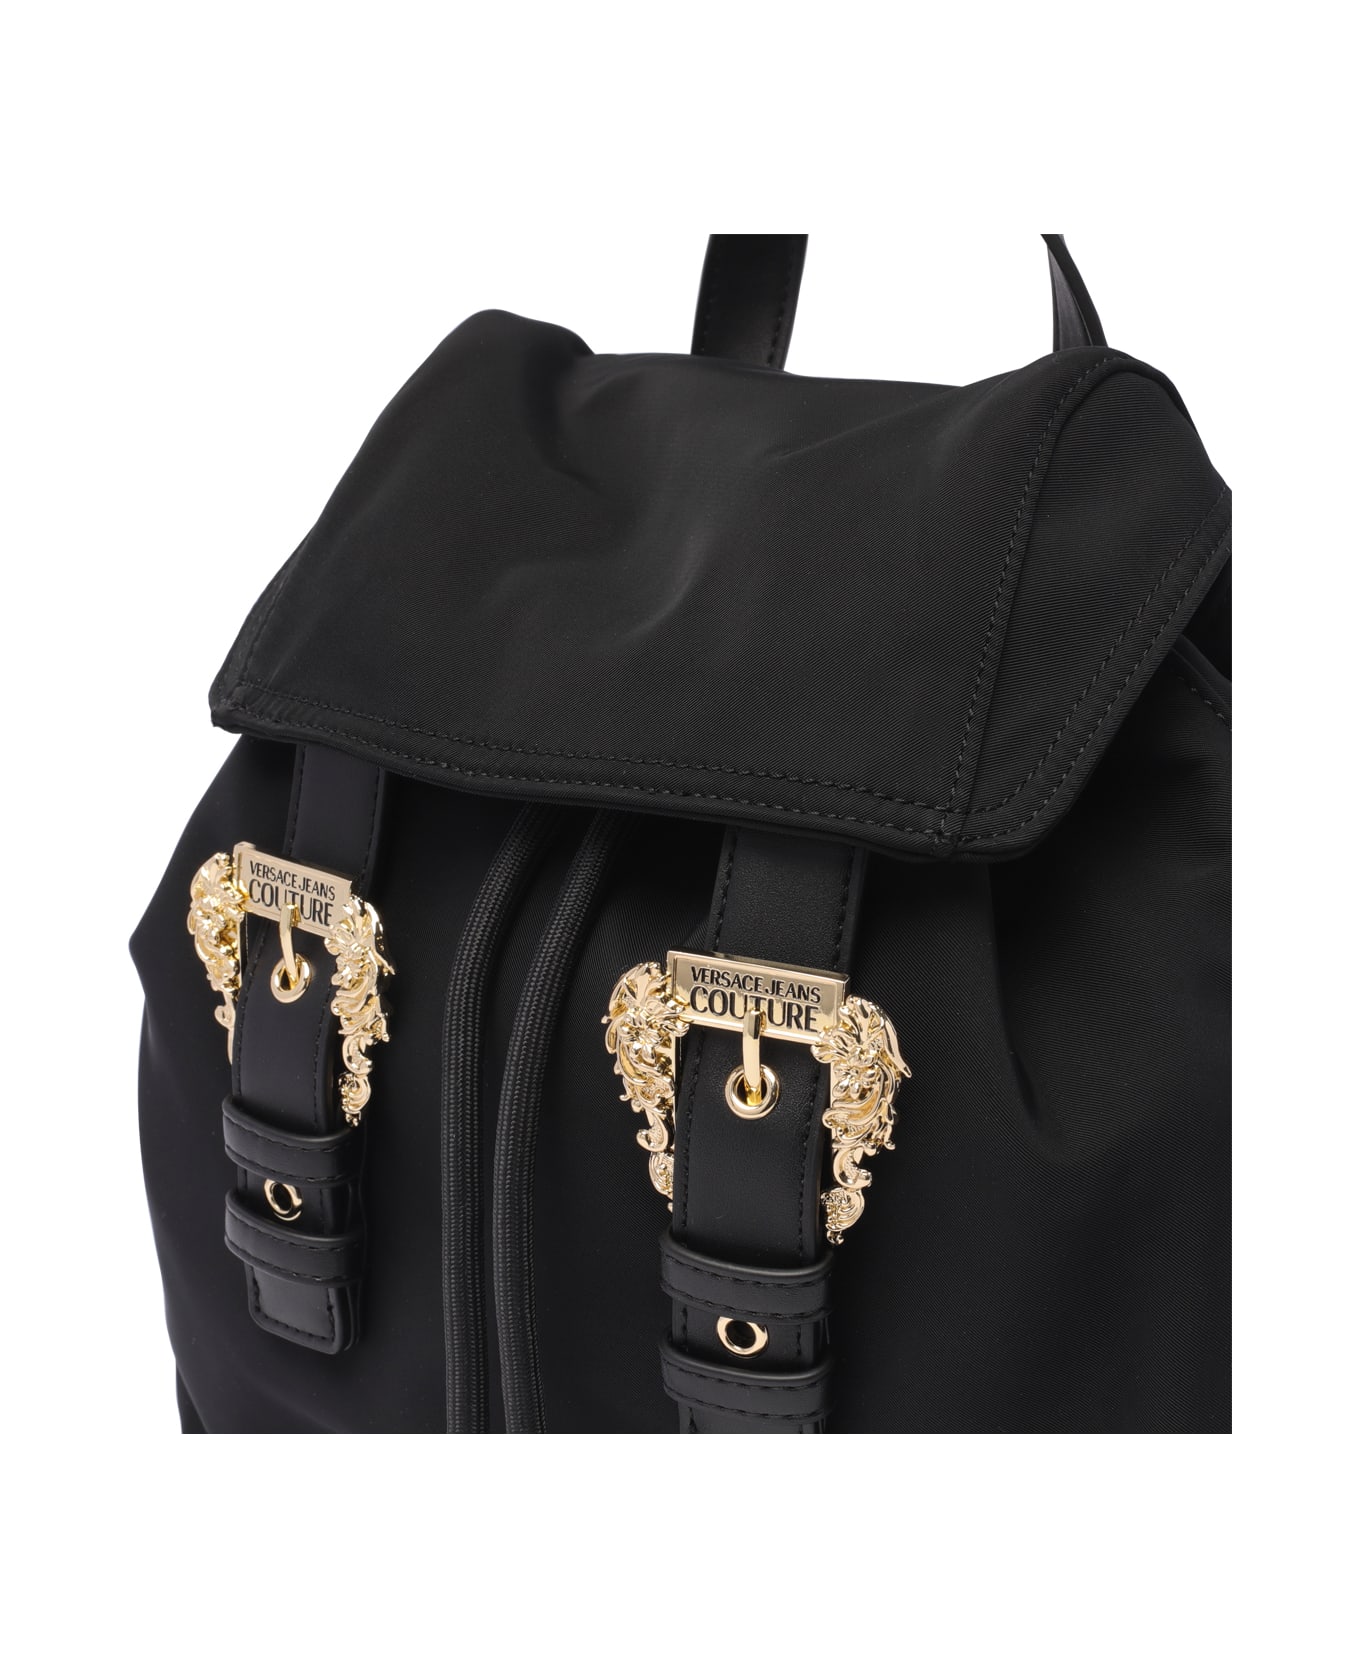 Versace Jeans Couture Backpack - Black